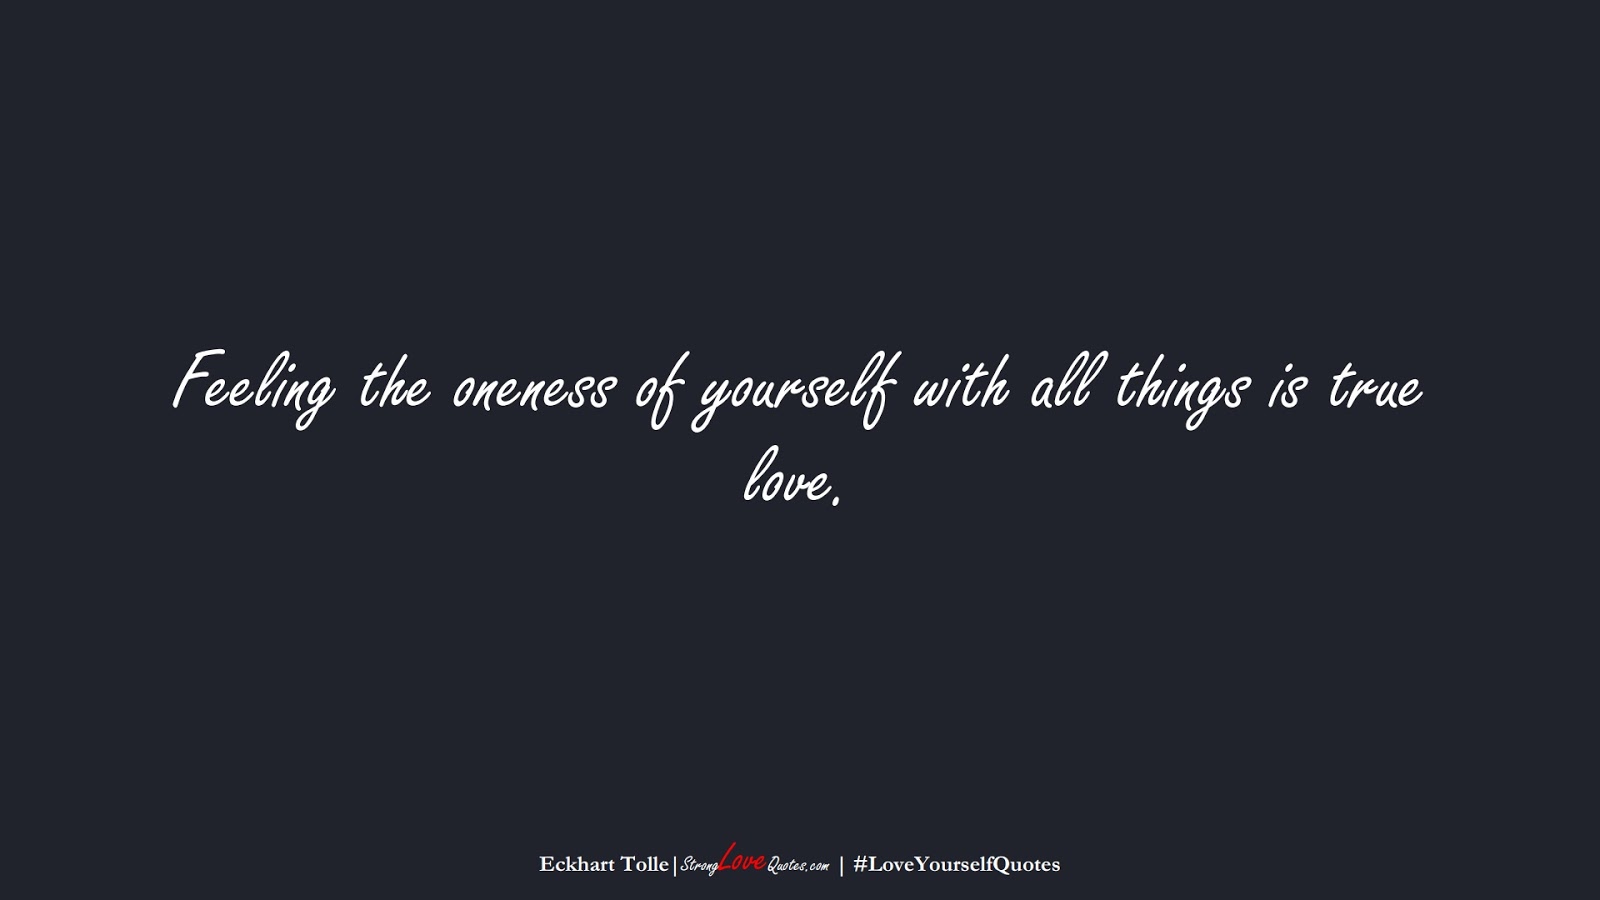 Feeling the oneness of yourself with all things is true love. (Eckhart Tolle);  #LoveYourselfQuotes